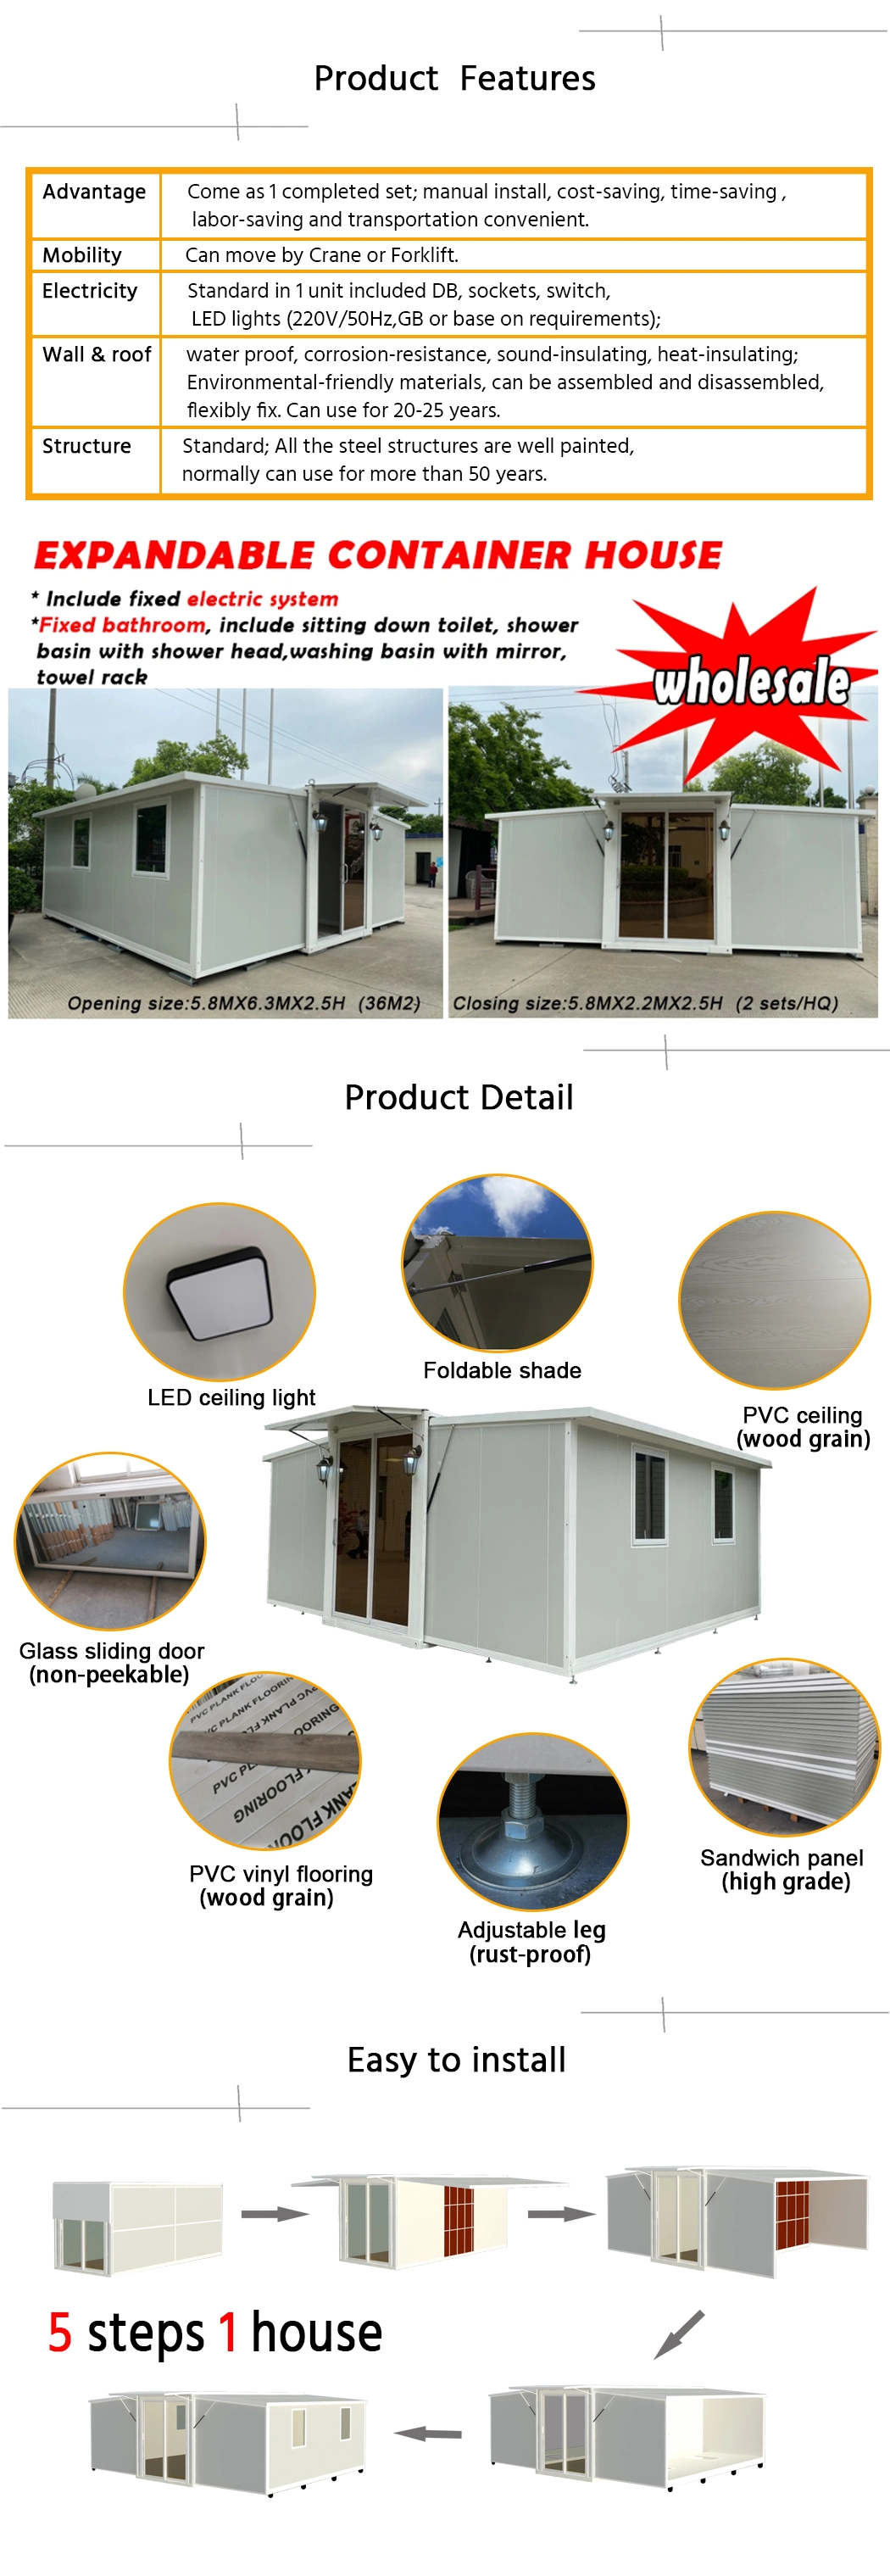 Steel Structure Sandwich Panel 2 Bedroom Expandable Container Home Plans